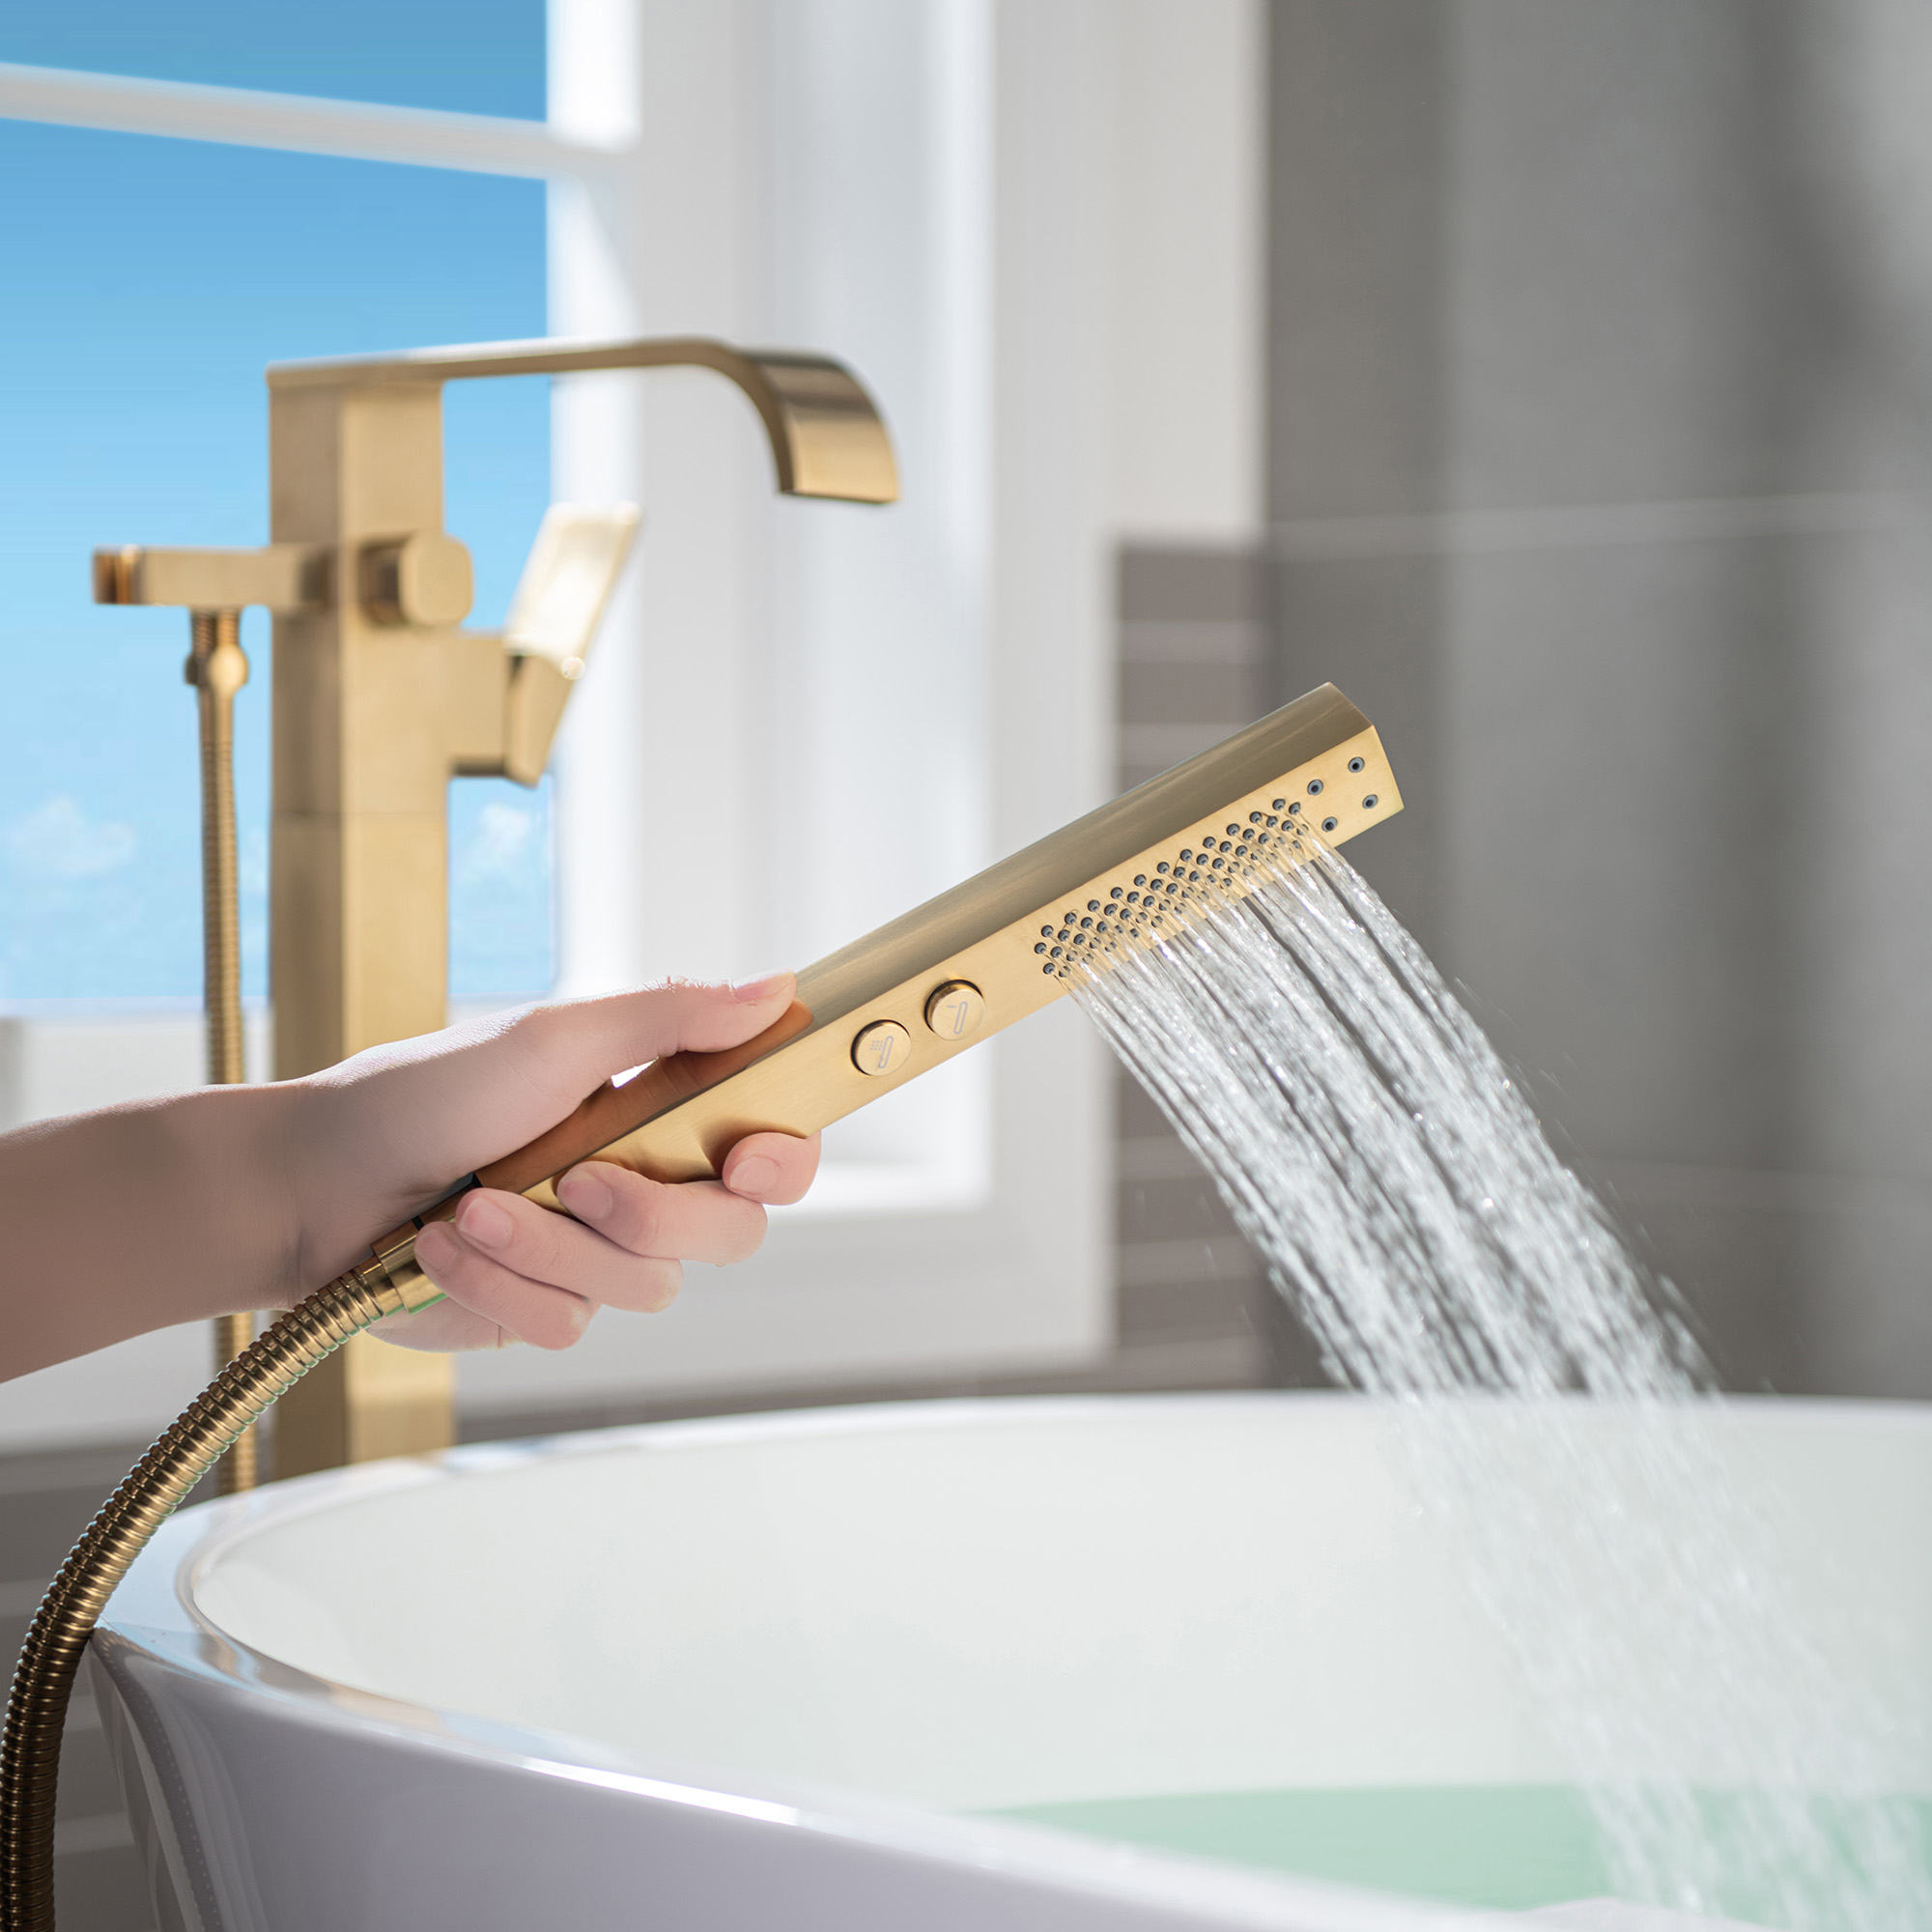  WOODBRIDGE F0039BG Contemporary Single Handle Floor Mount Freestanding Tub Filler Faucet with Hand shower in Brushed Gold Finish._12214